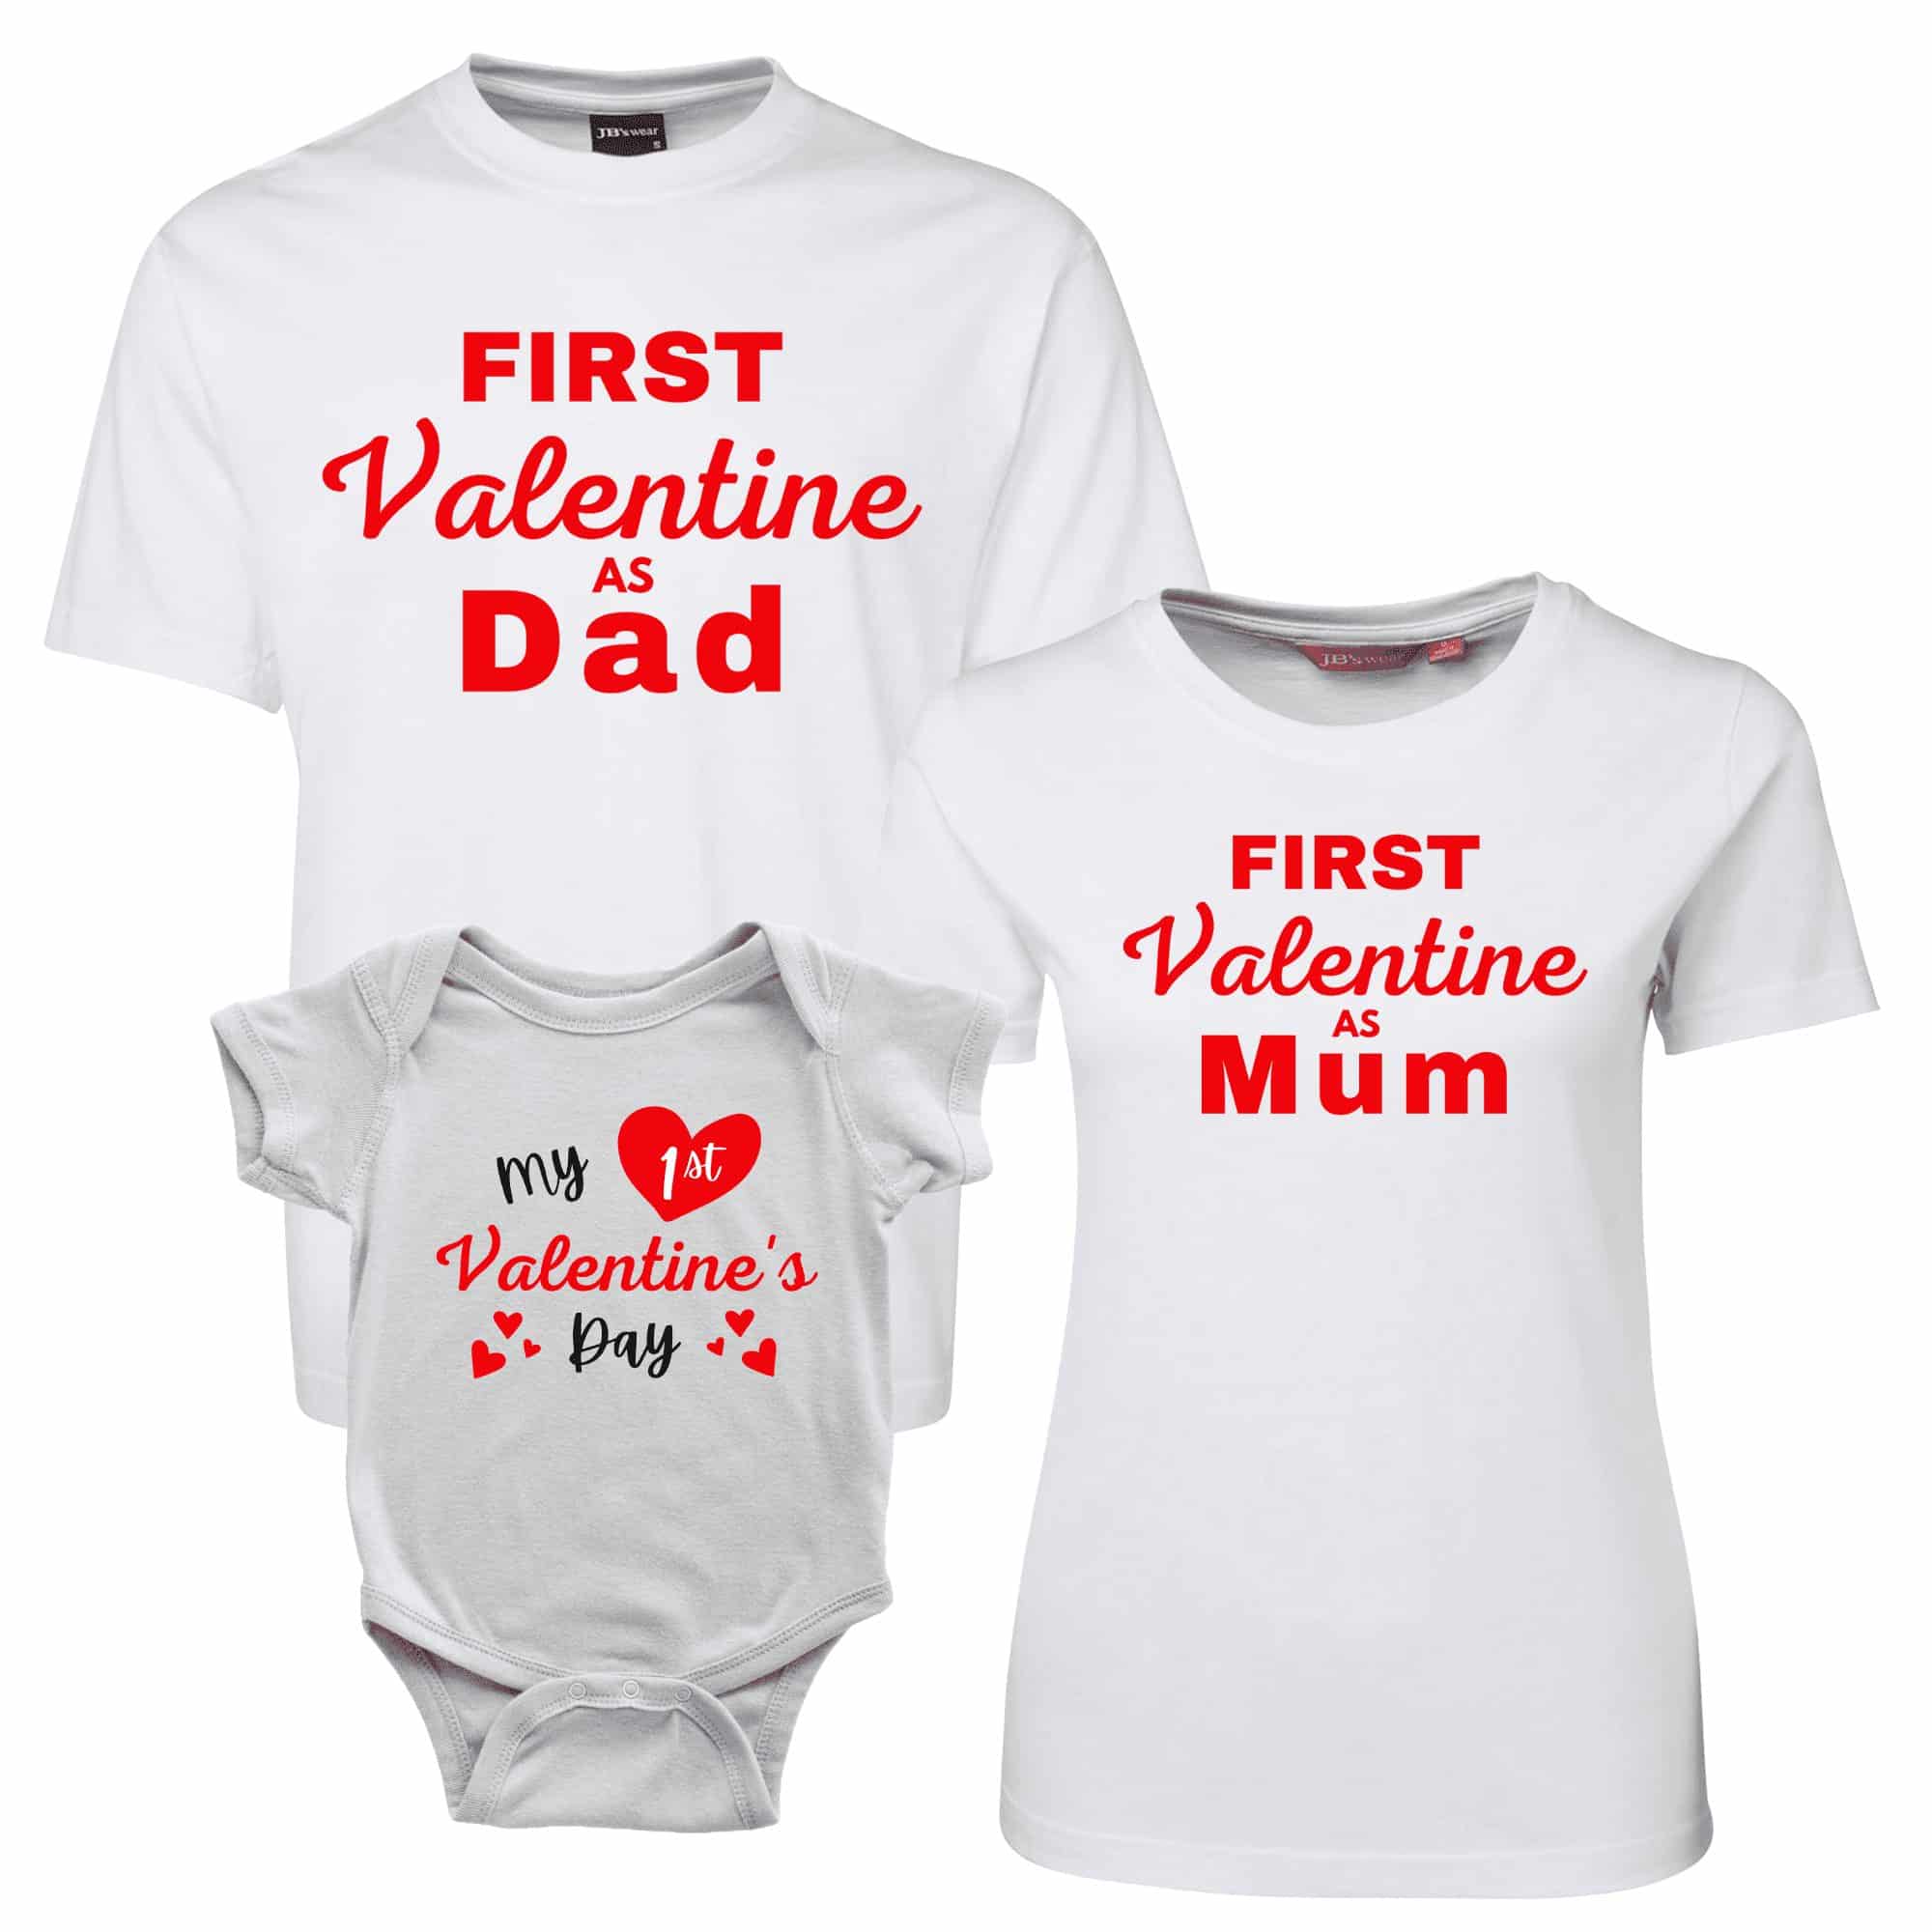 First-Valentines-Family-Shirt